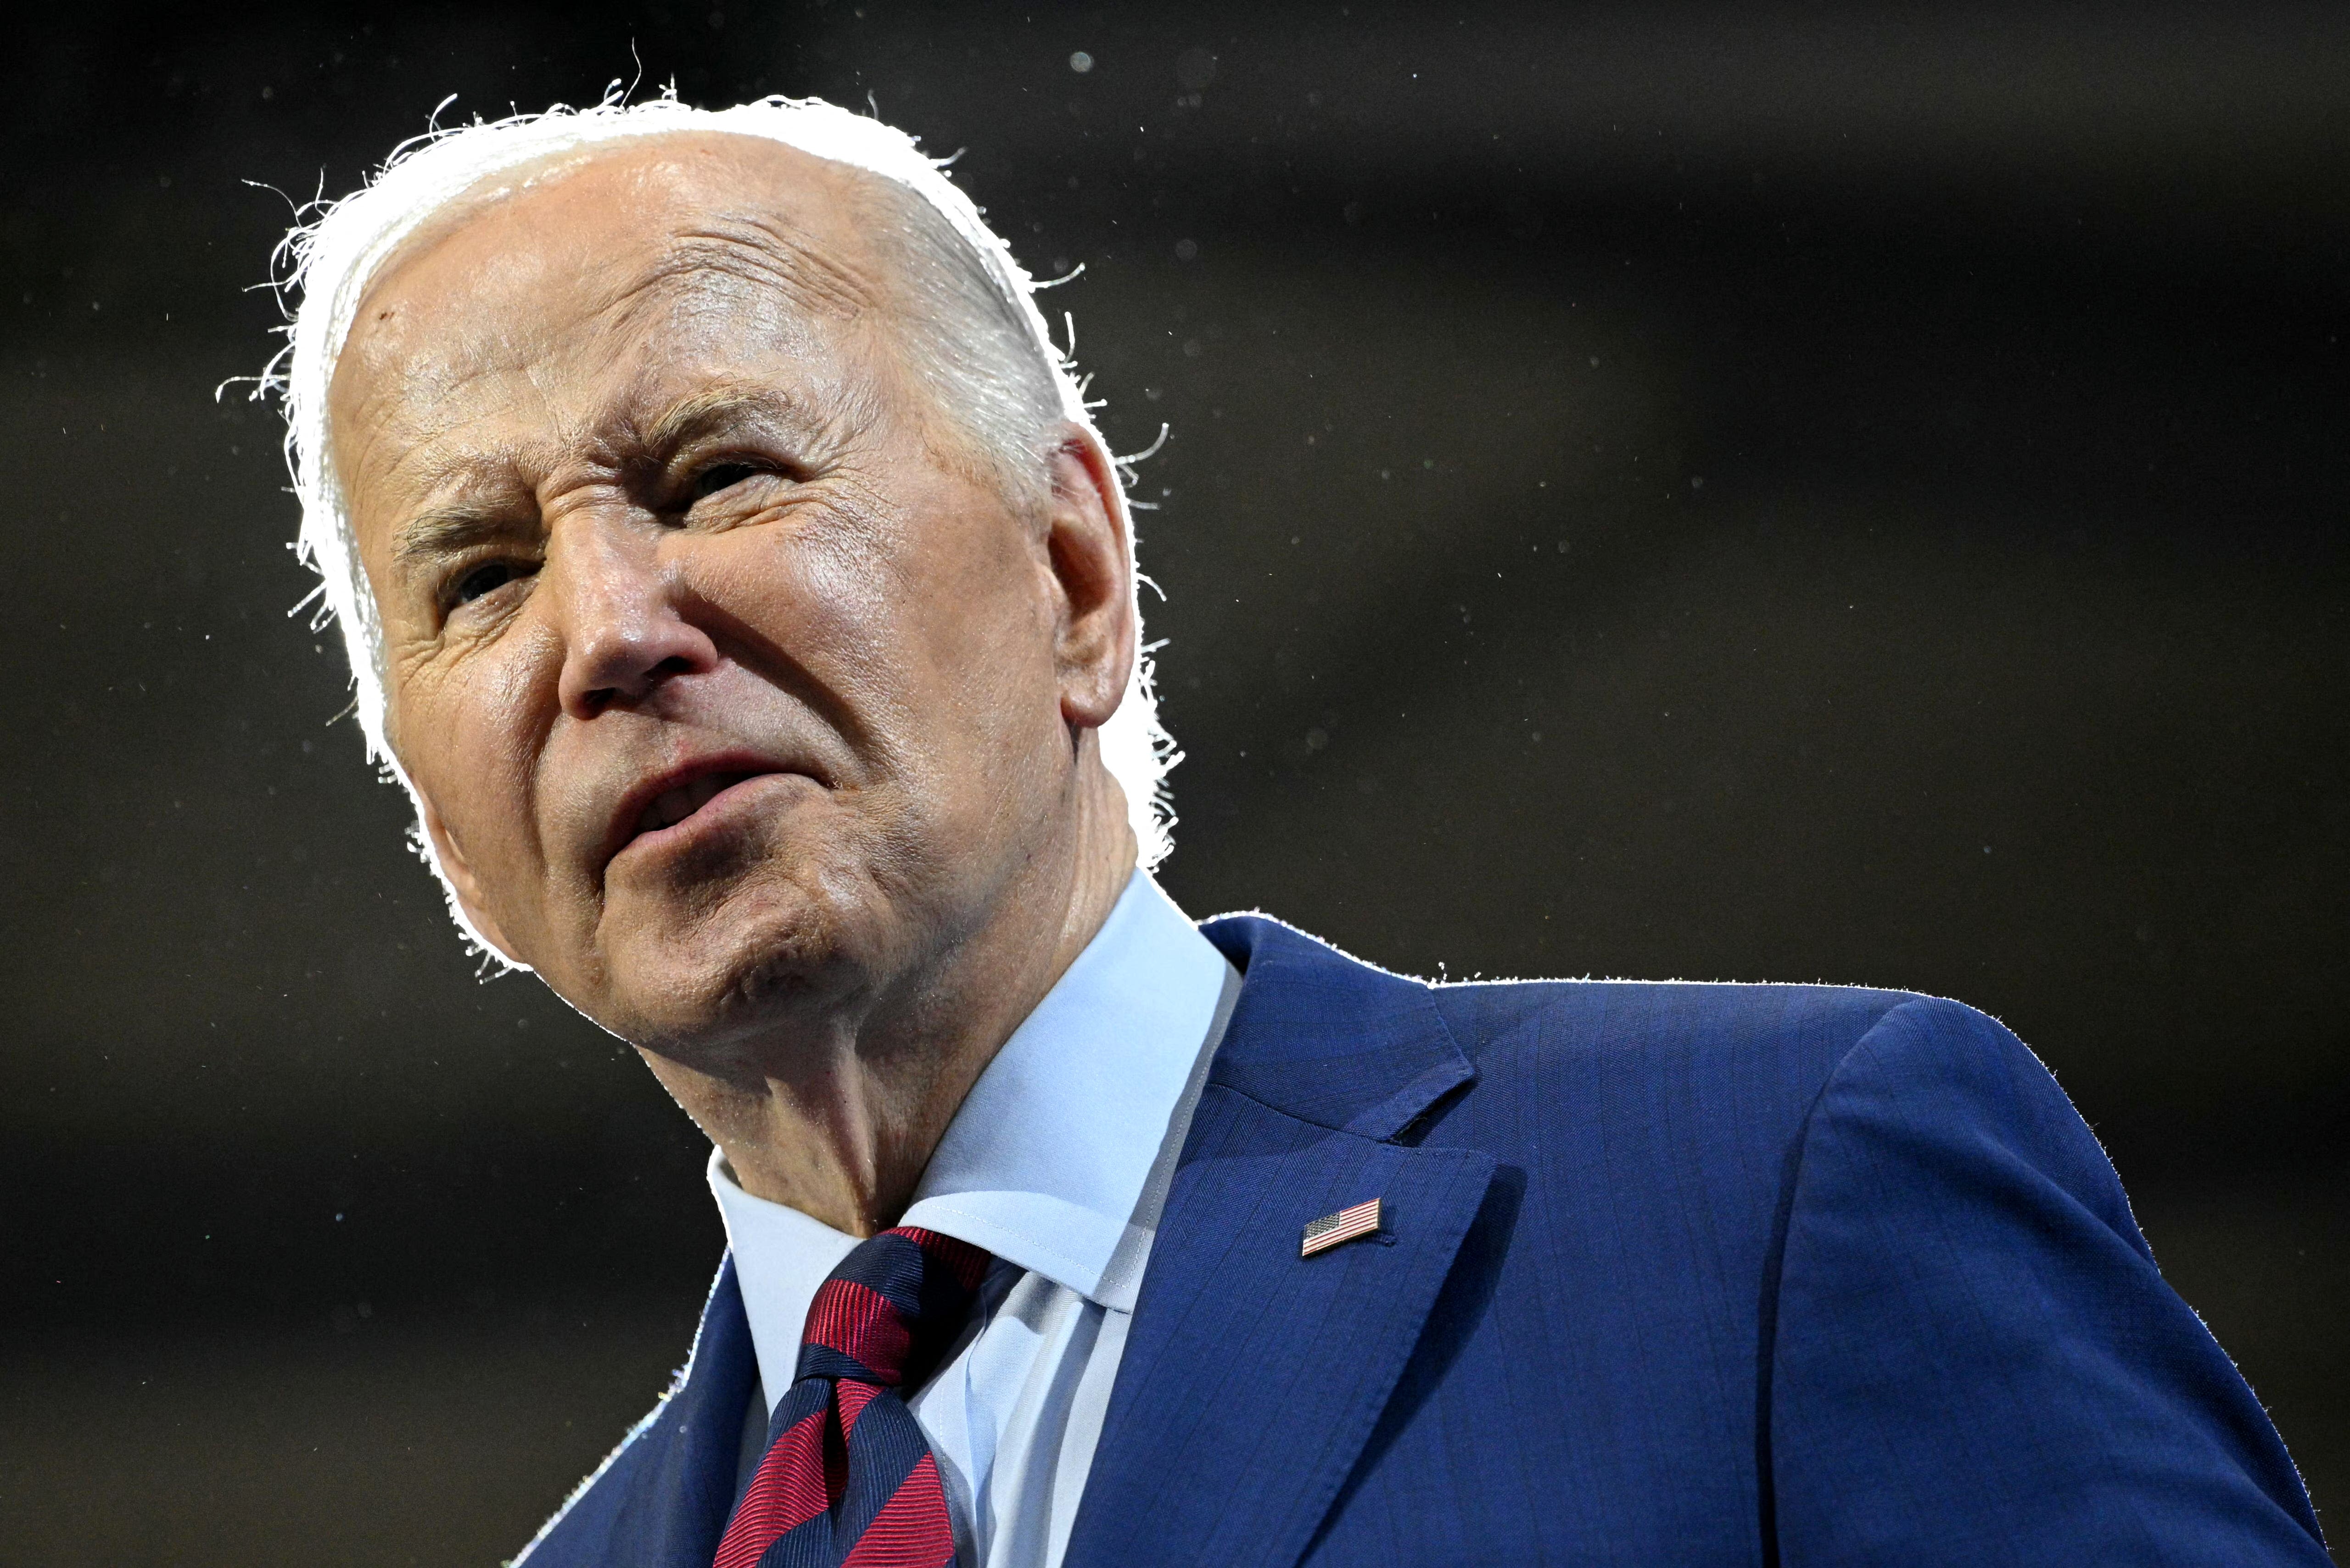 Michael Bloomberg, Al Gore, Nancy Pelosi among 19 to receive Medal of Freedom from Biden